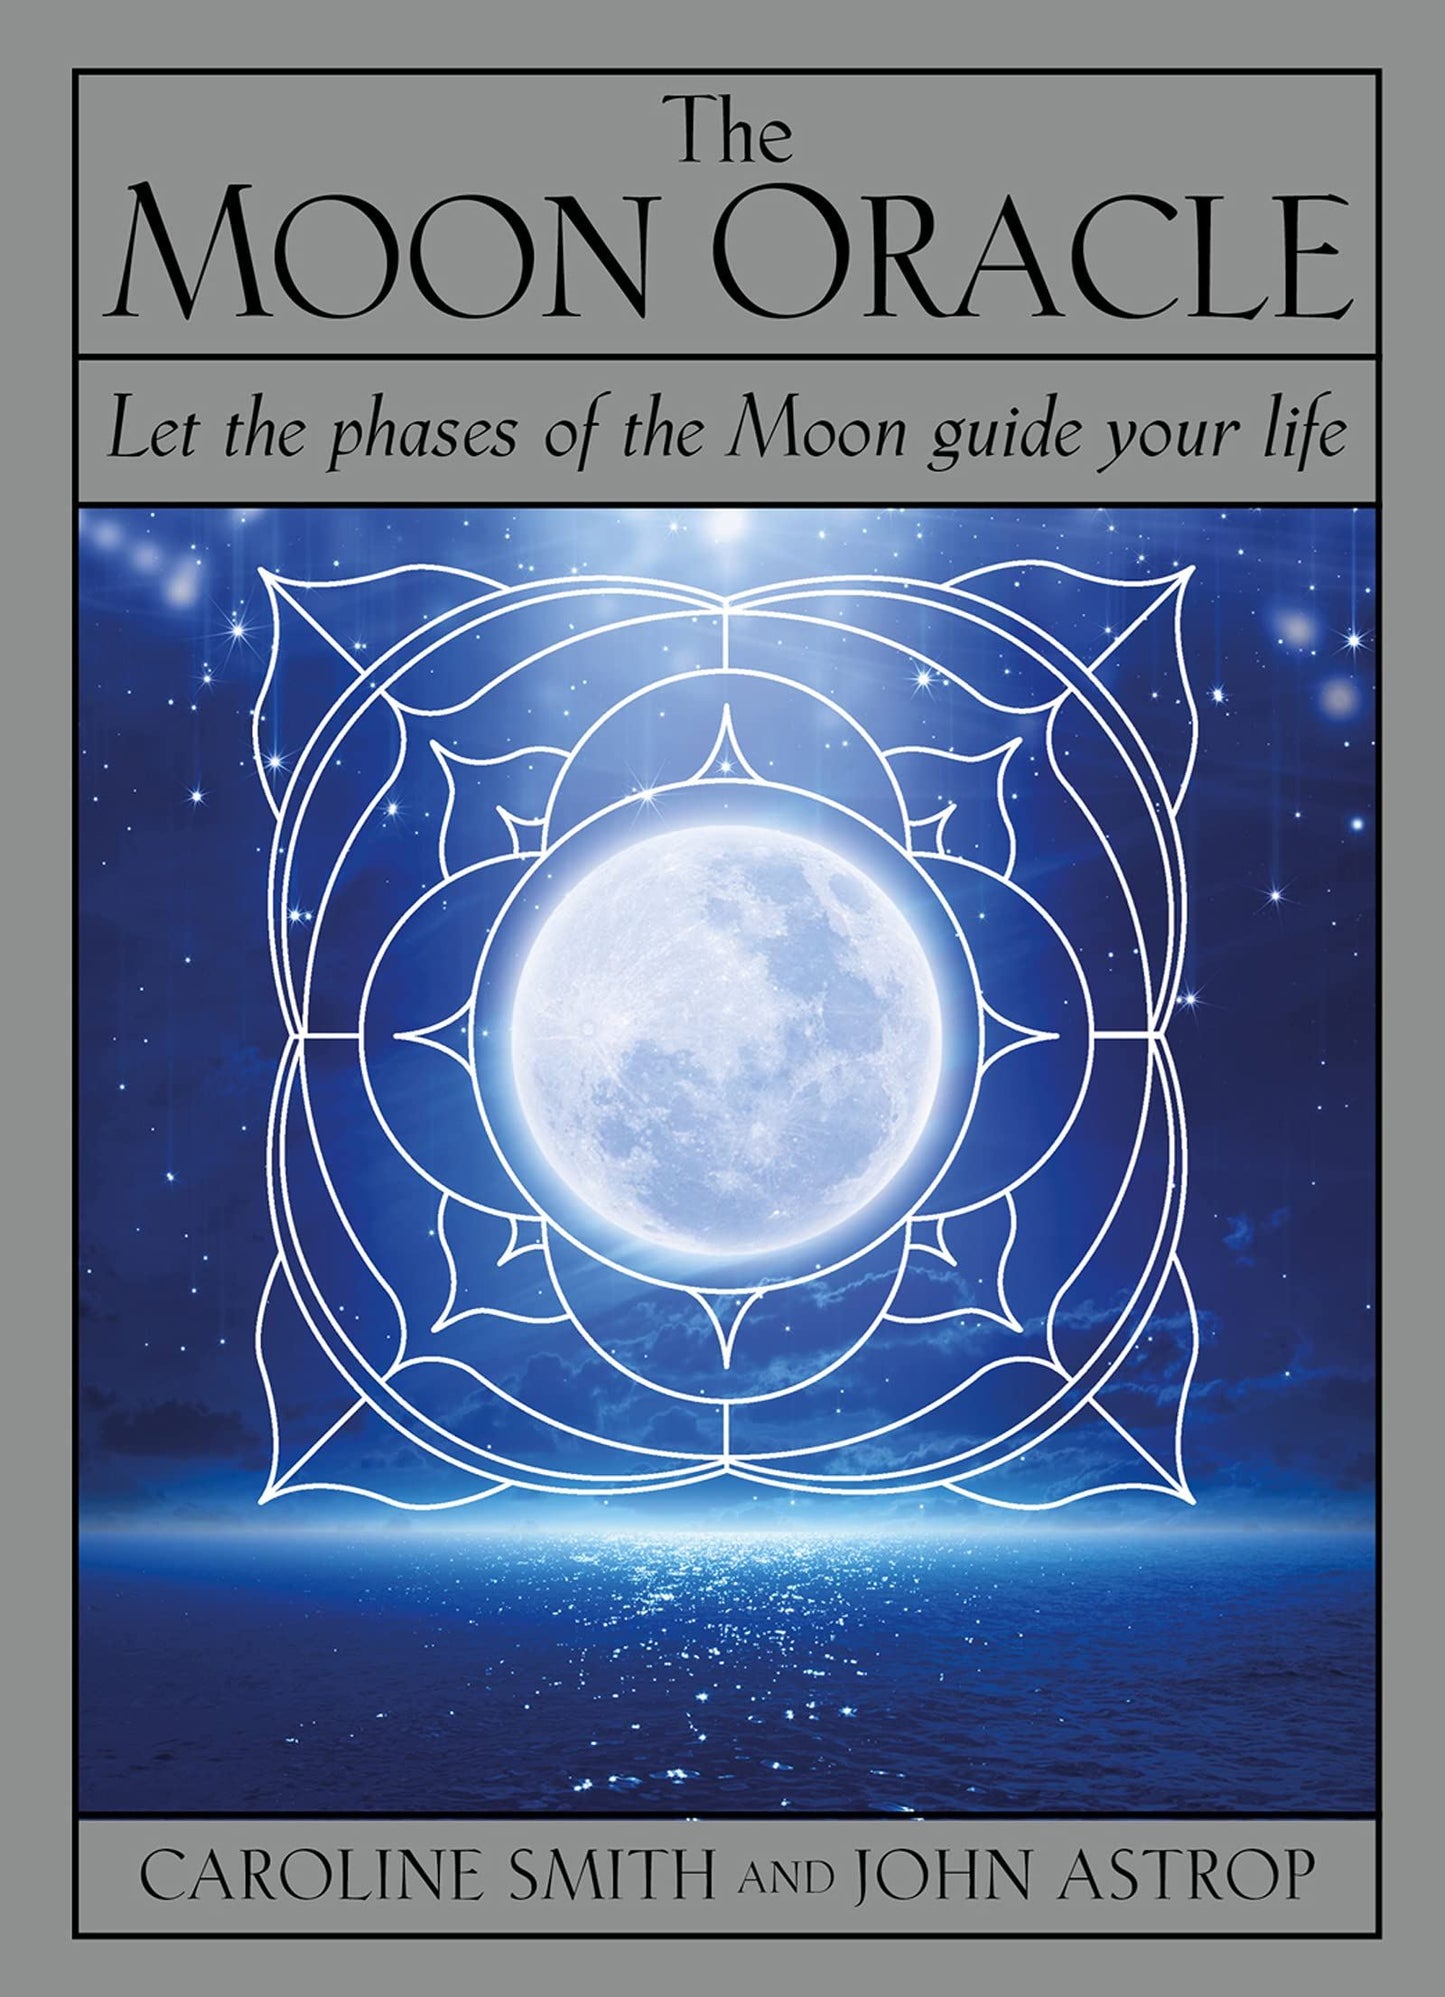 Moon Oracle by Caroline Smith and John Astrop